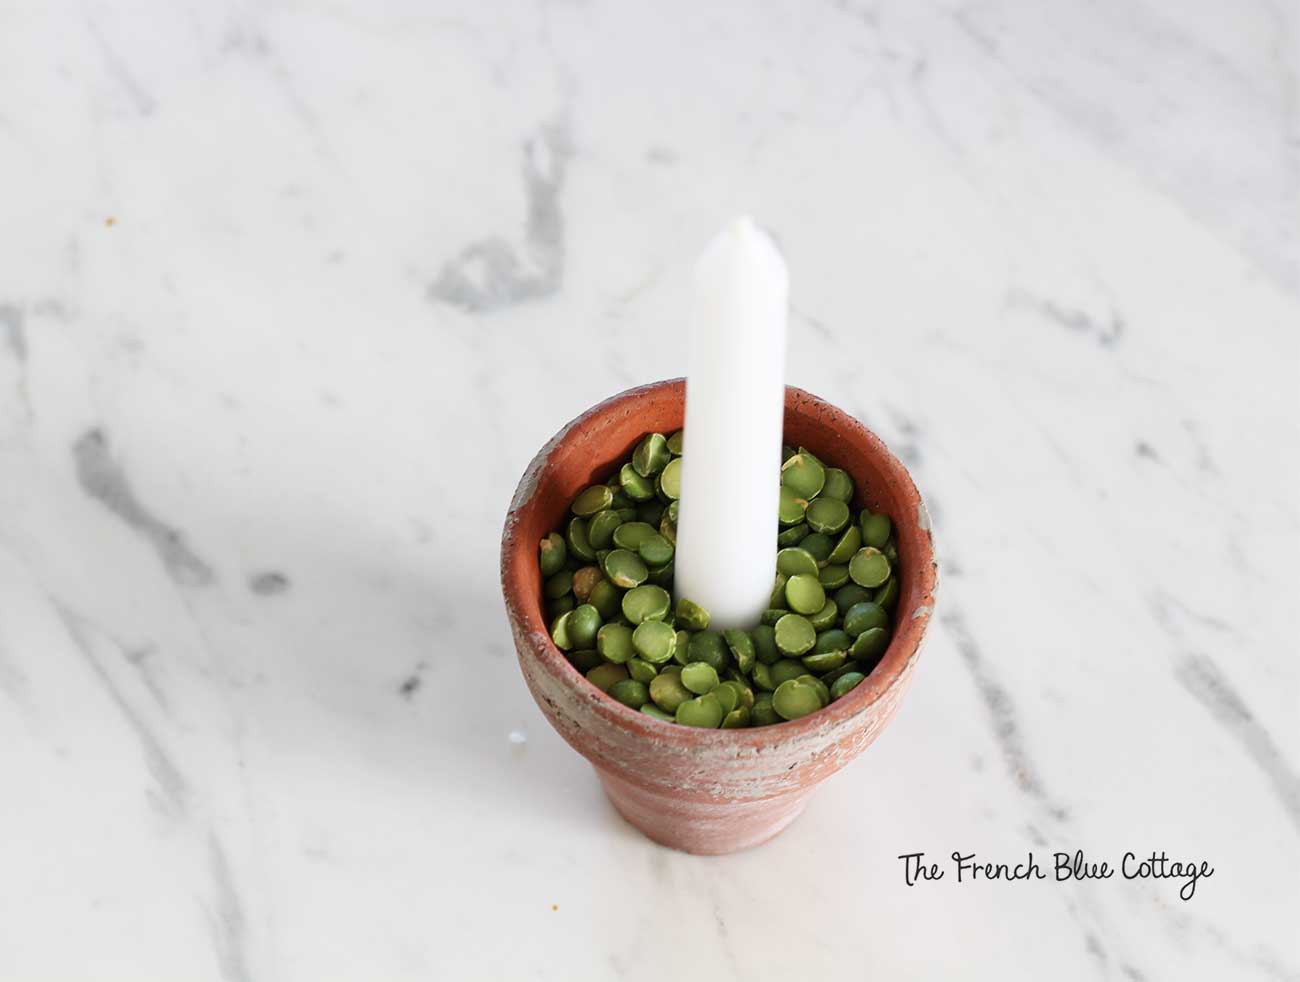 Dried split peas look festive and hold the candle in place.